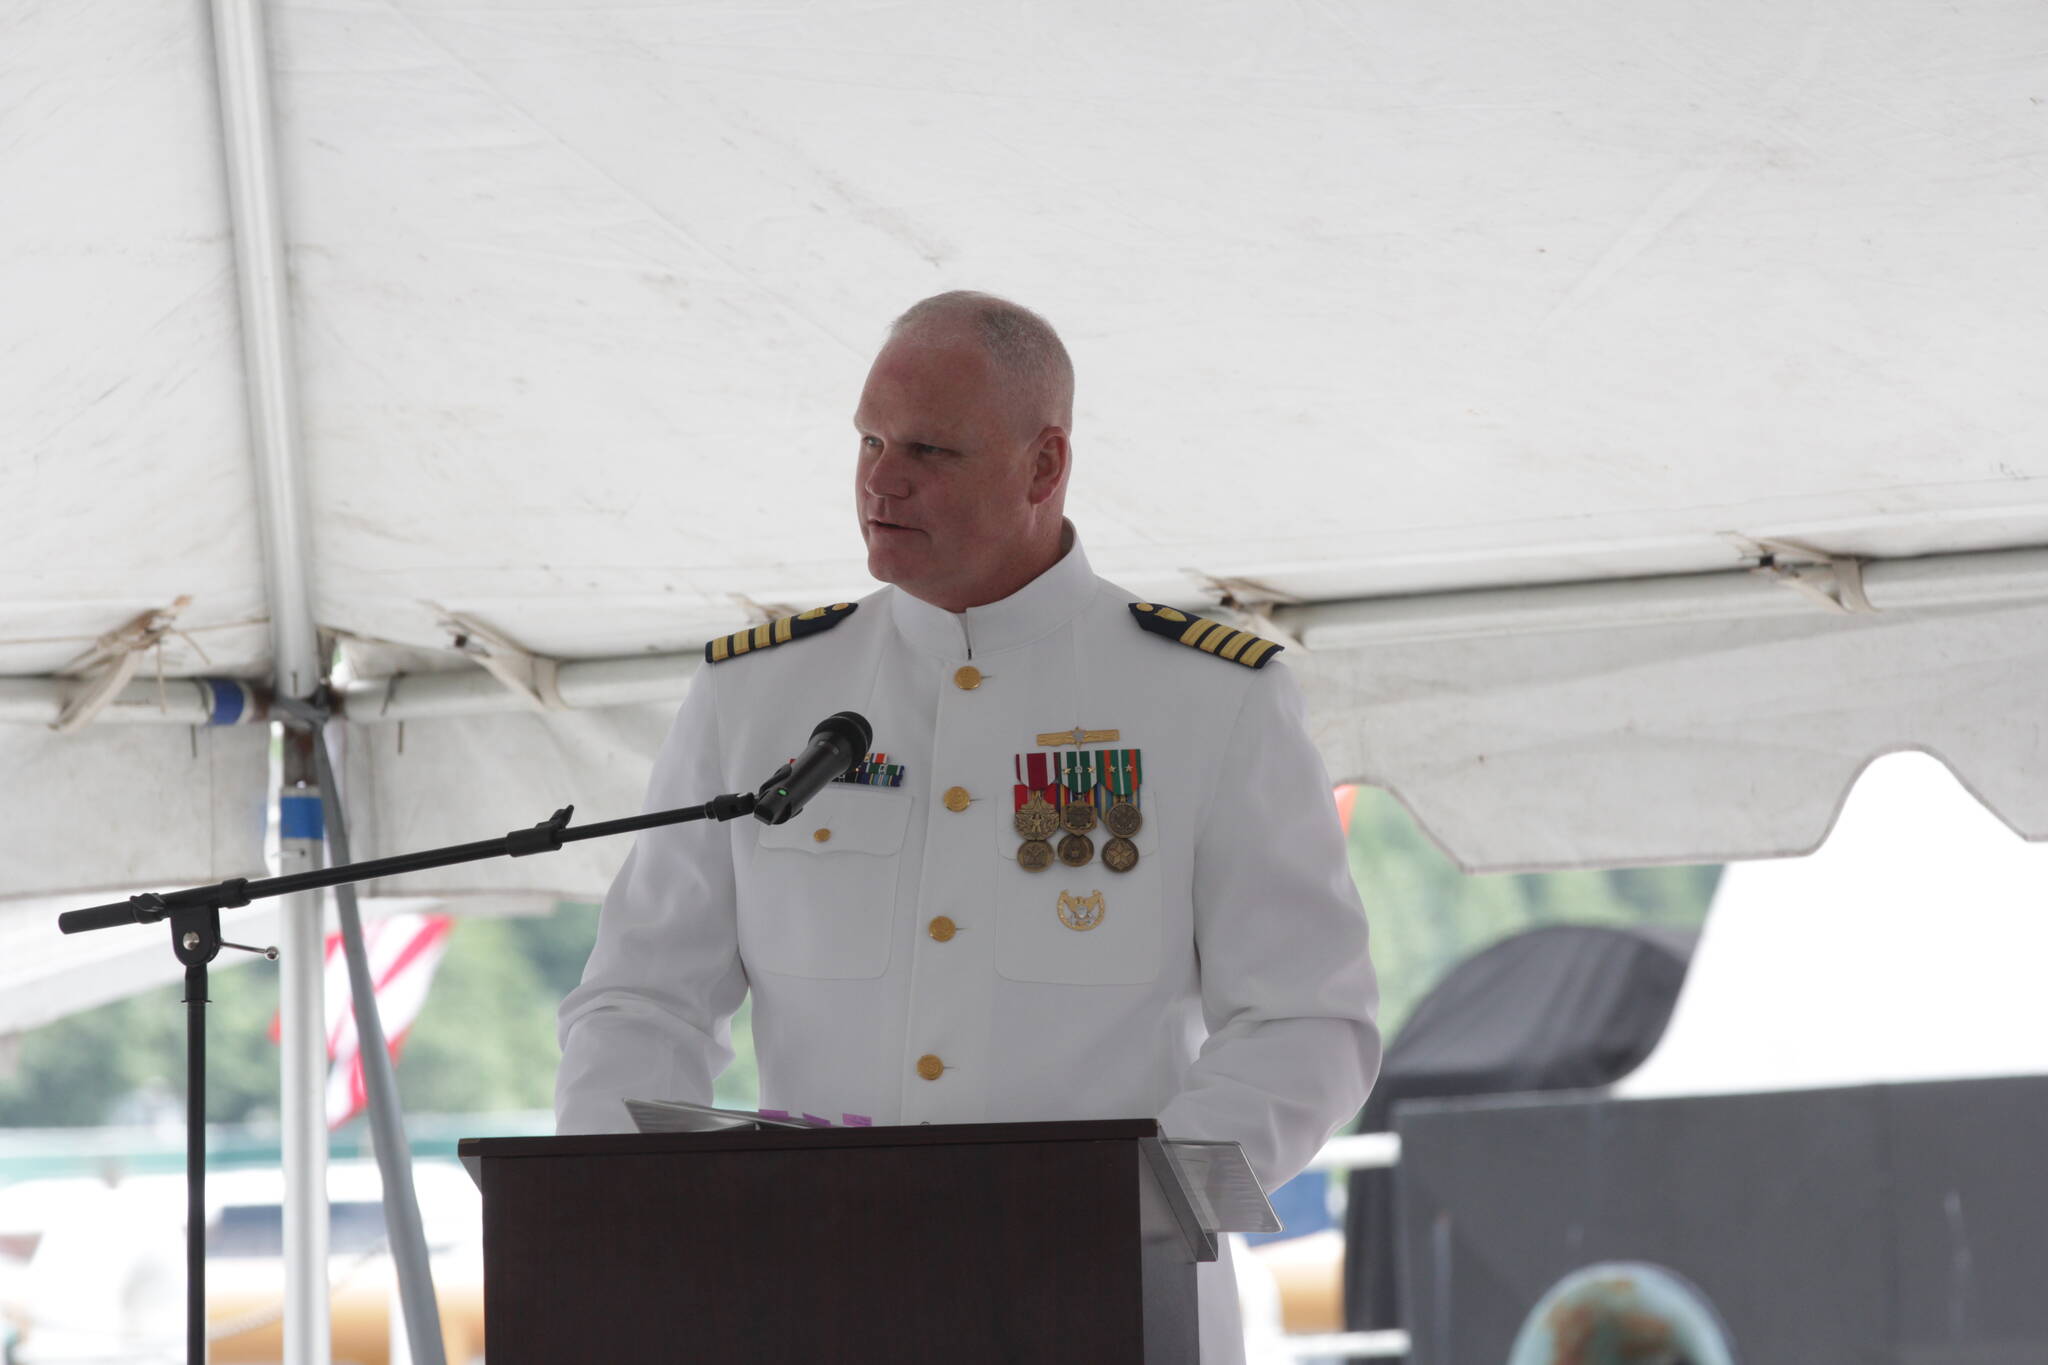 Capt. Darwin R. Jensen, Sector Juneau’s new commander, speaks during the change of command ceremony at the station on July 7, 2021. (Michael S. Lockett / Juneau Empire)